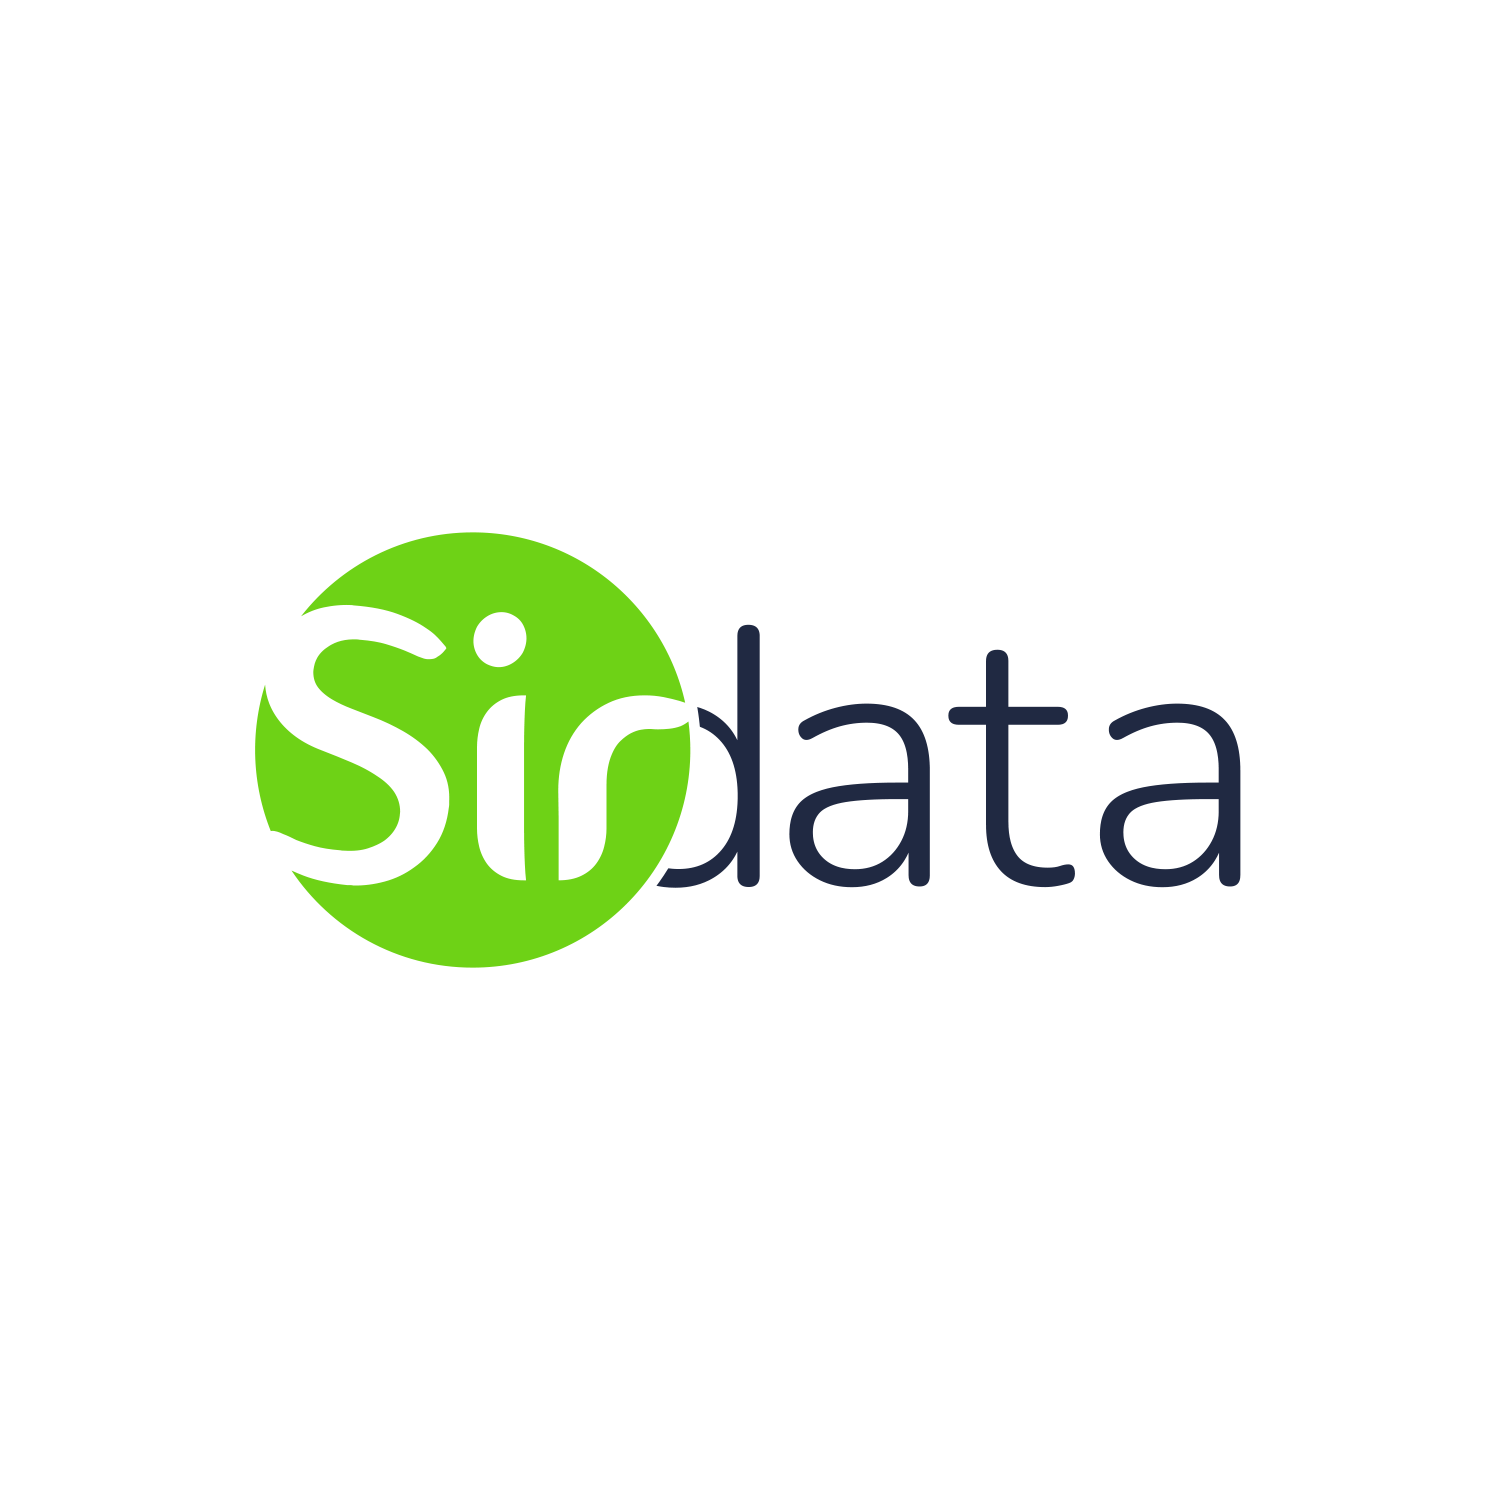 Sirdata announces enabling GDPR compliant behavioral targeting without cookies nor consent